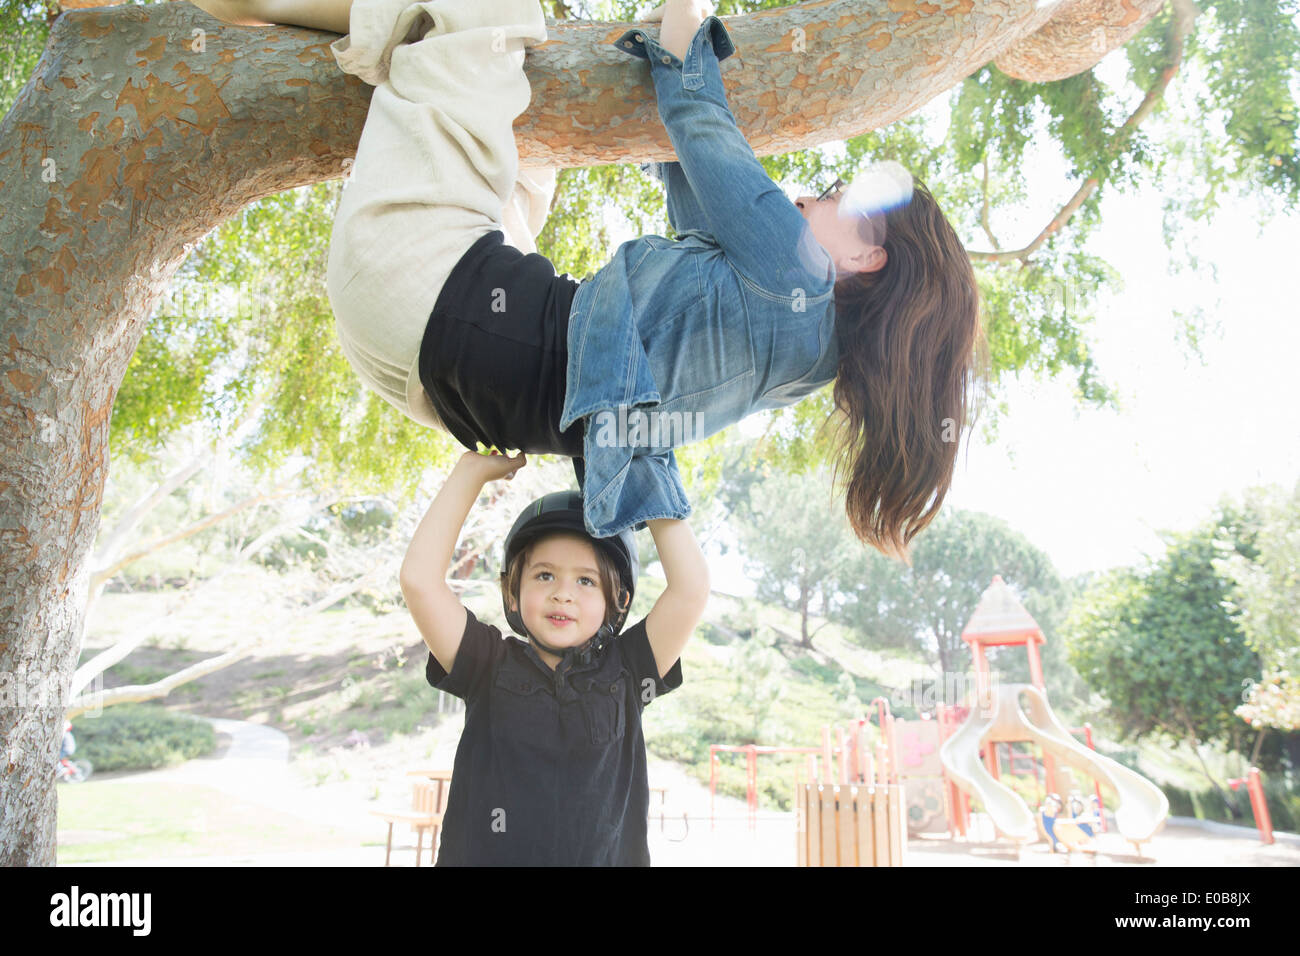 Upside down mother wrapped around tree branch with son helping Stock Photo